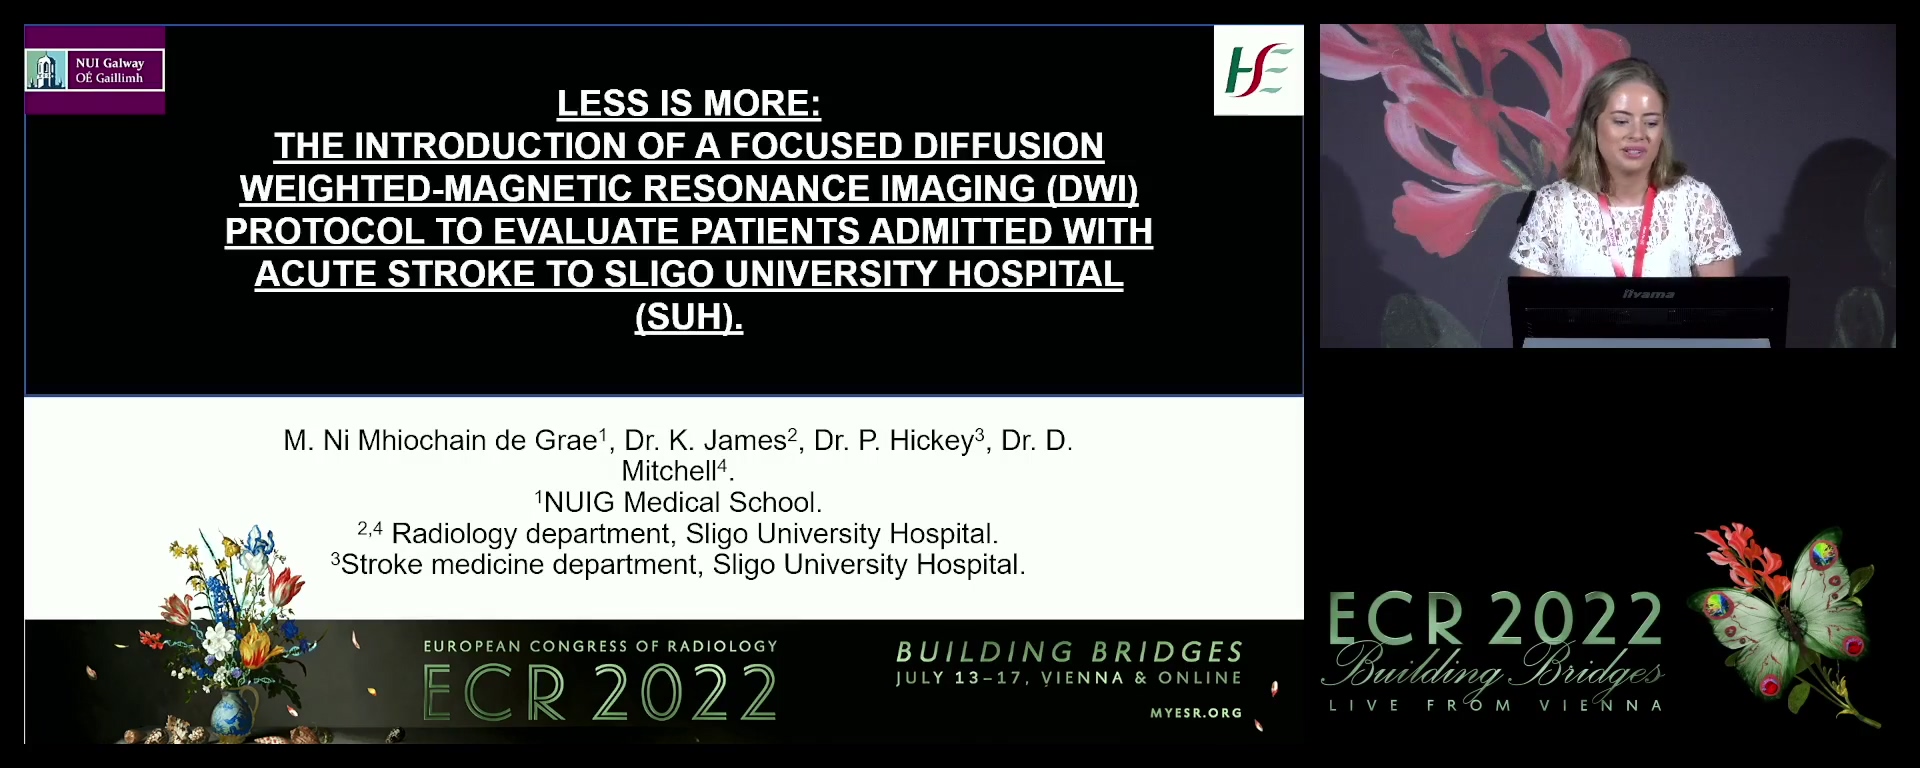 Less is more: The introduction of a focused diffusion-weighted magnetic resonance imaging (DWI-MRI) protocol to evaluate patients admitted with acute stroke to Sligo University Hospital - Meadhbh Ni Mhiochain de Grae, Thurles, Tipperary / IE